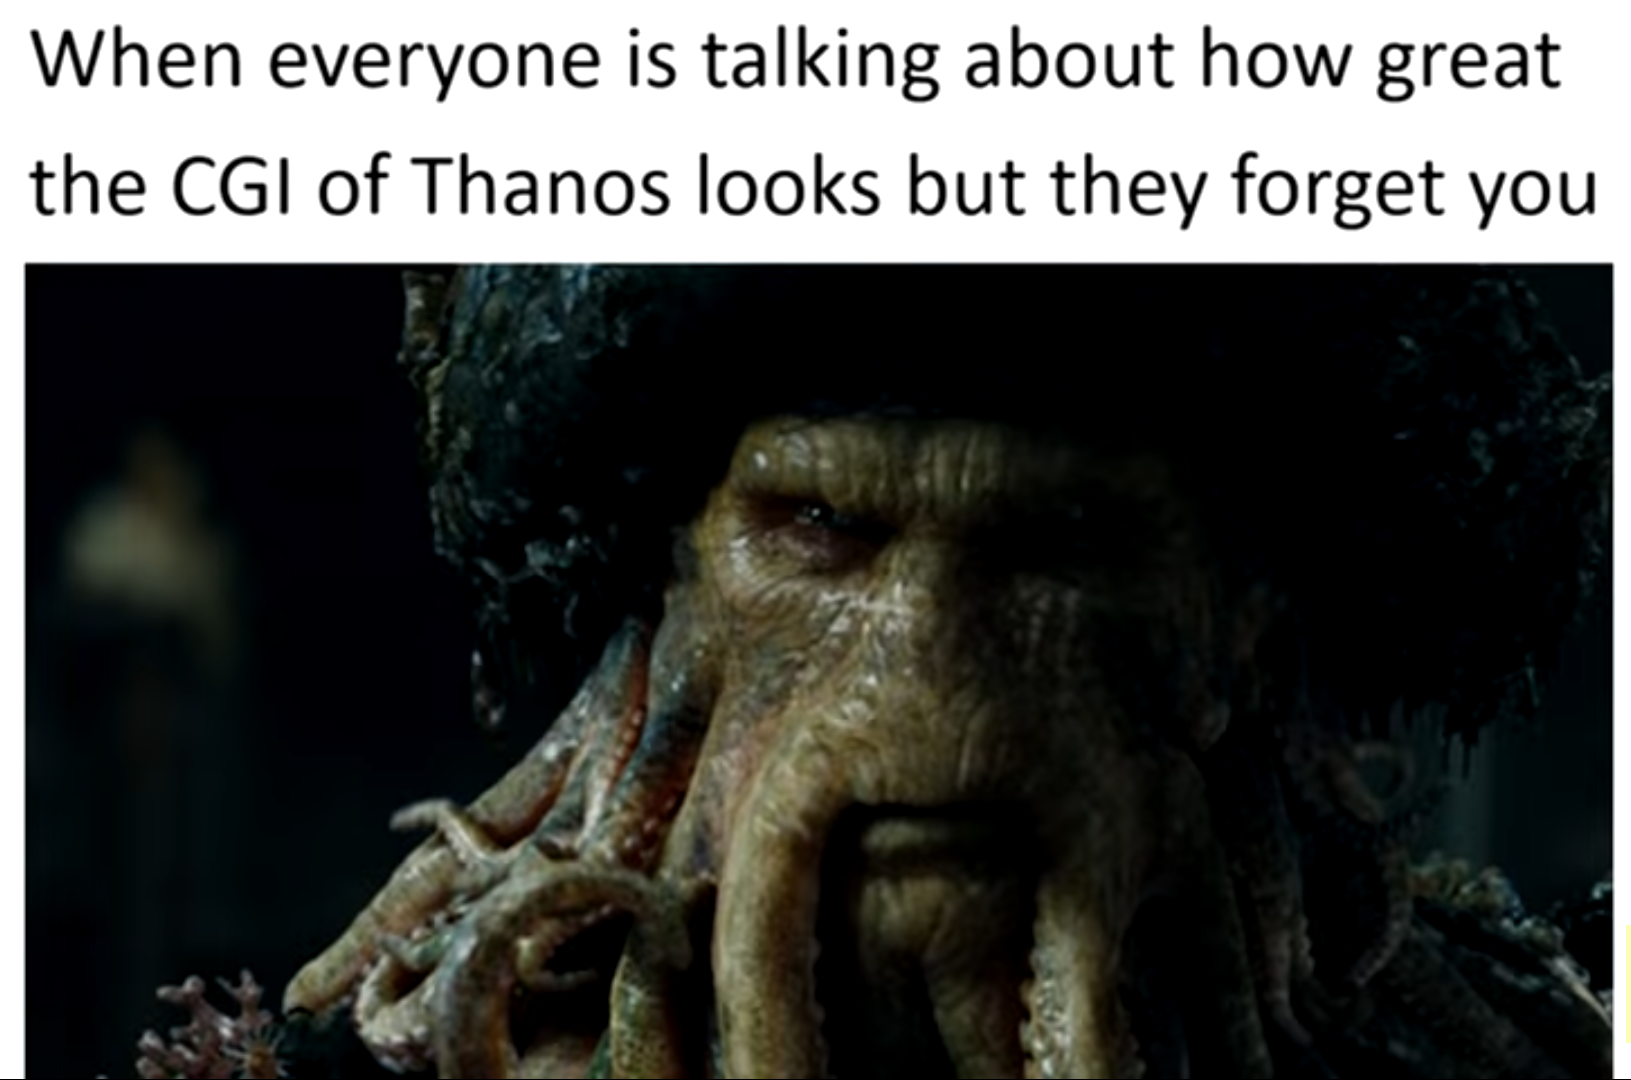 jones pirates of the caribbean - When everyone is talking about how great the Cgi of Thanos looks but they forget you